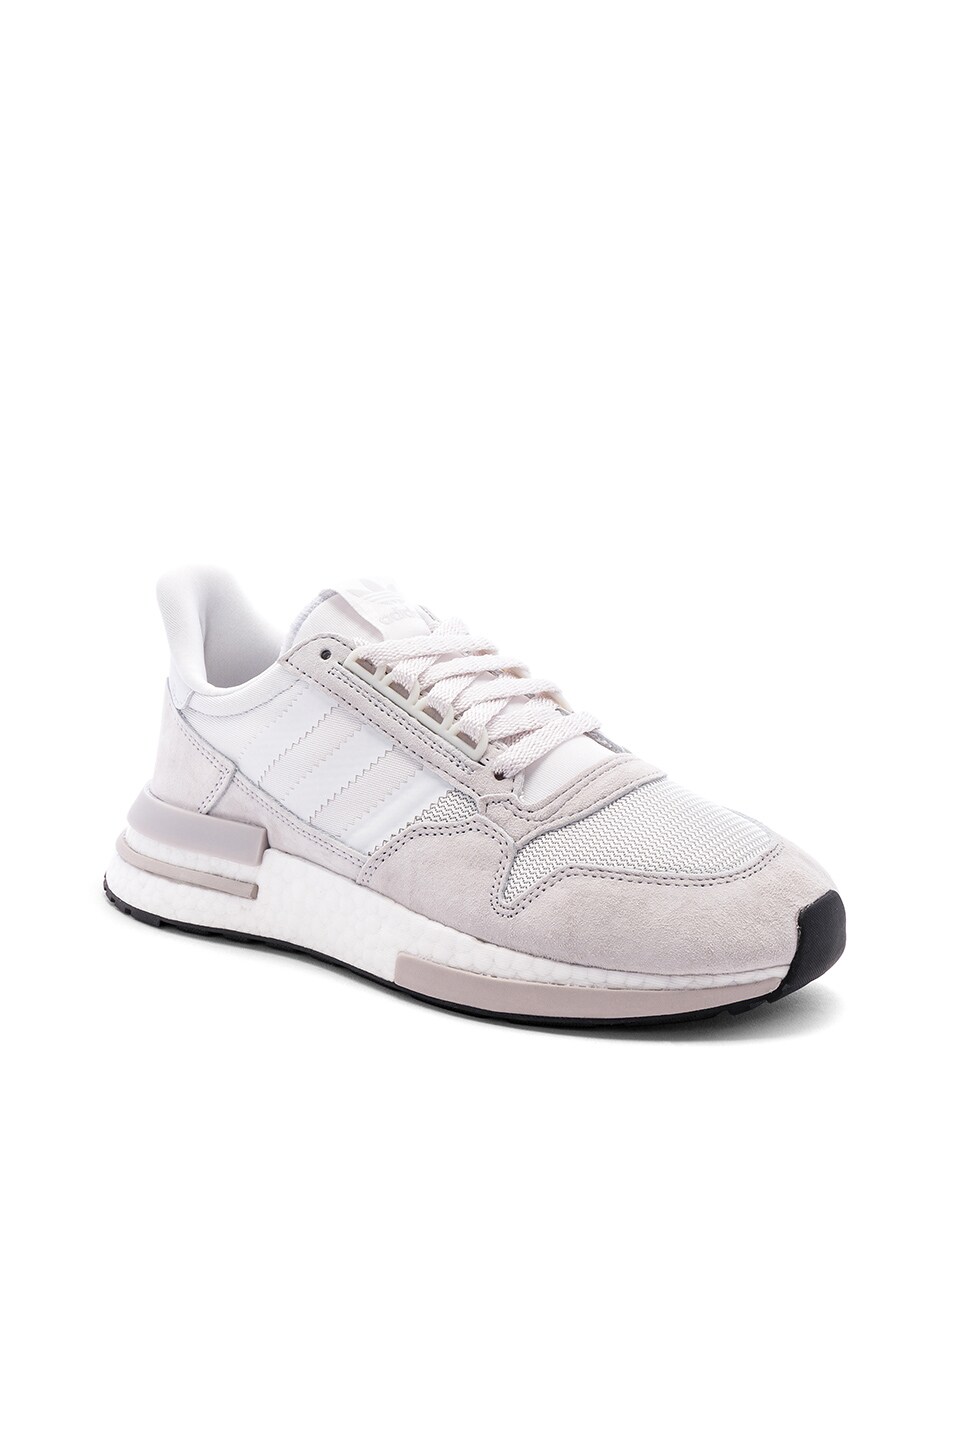 Image 1 of adidas Originals ZX 500 RM in Cloud White & White & Cloud White